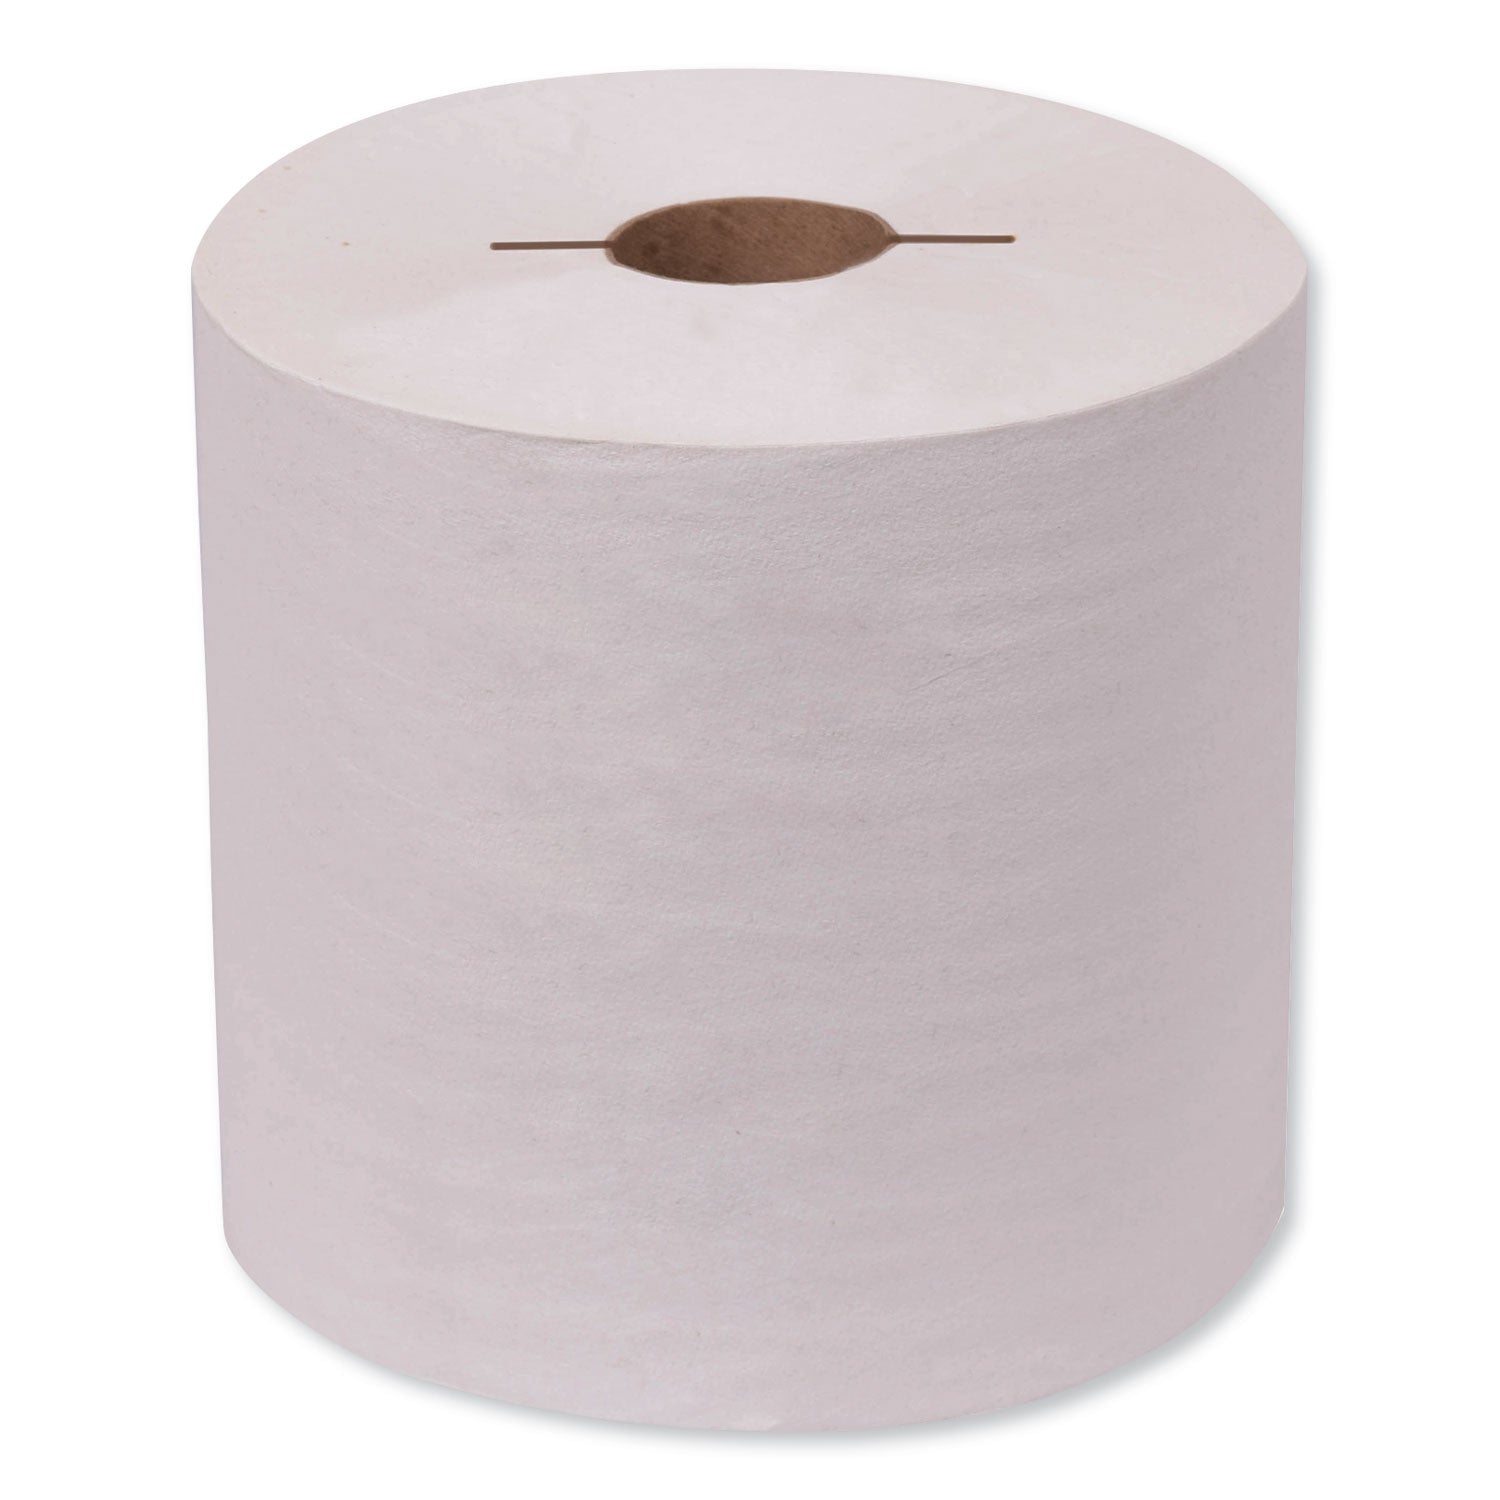 universal-hand-towel-roll-notched-1-ply-75-x-10-natural-white-960-roll-6-carton_trk7171400 - 1